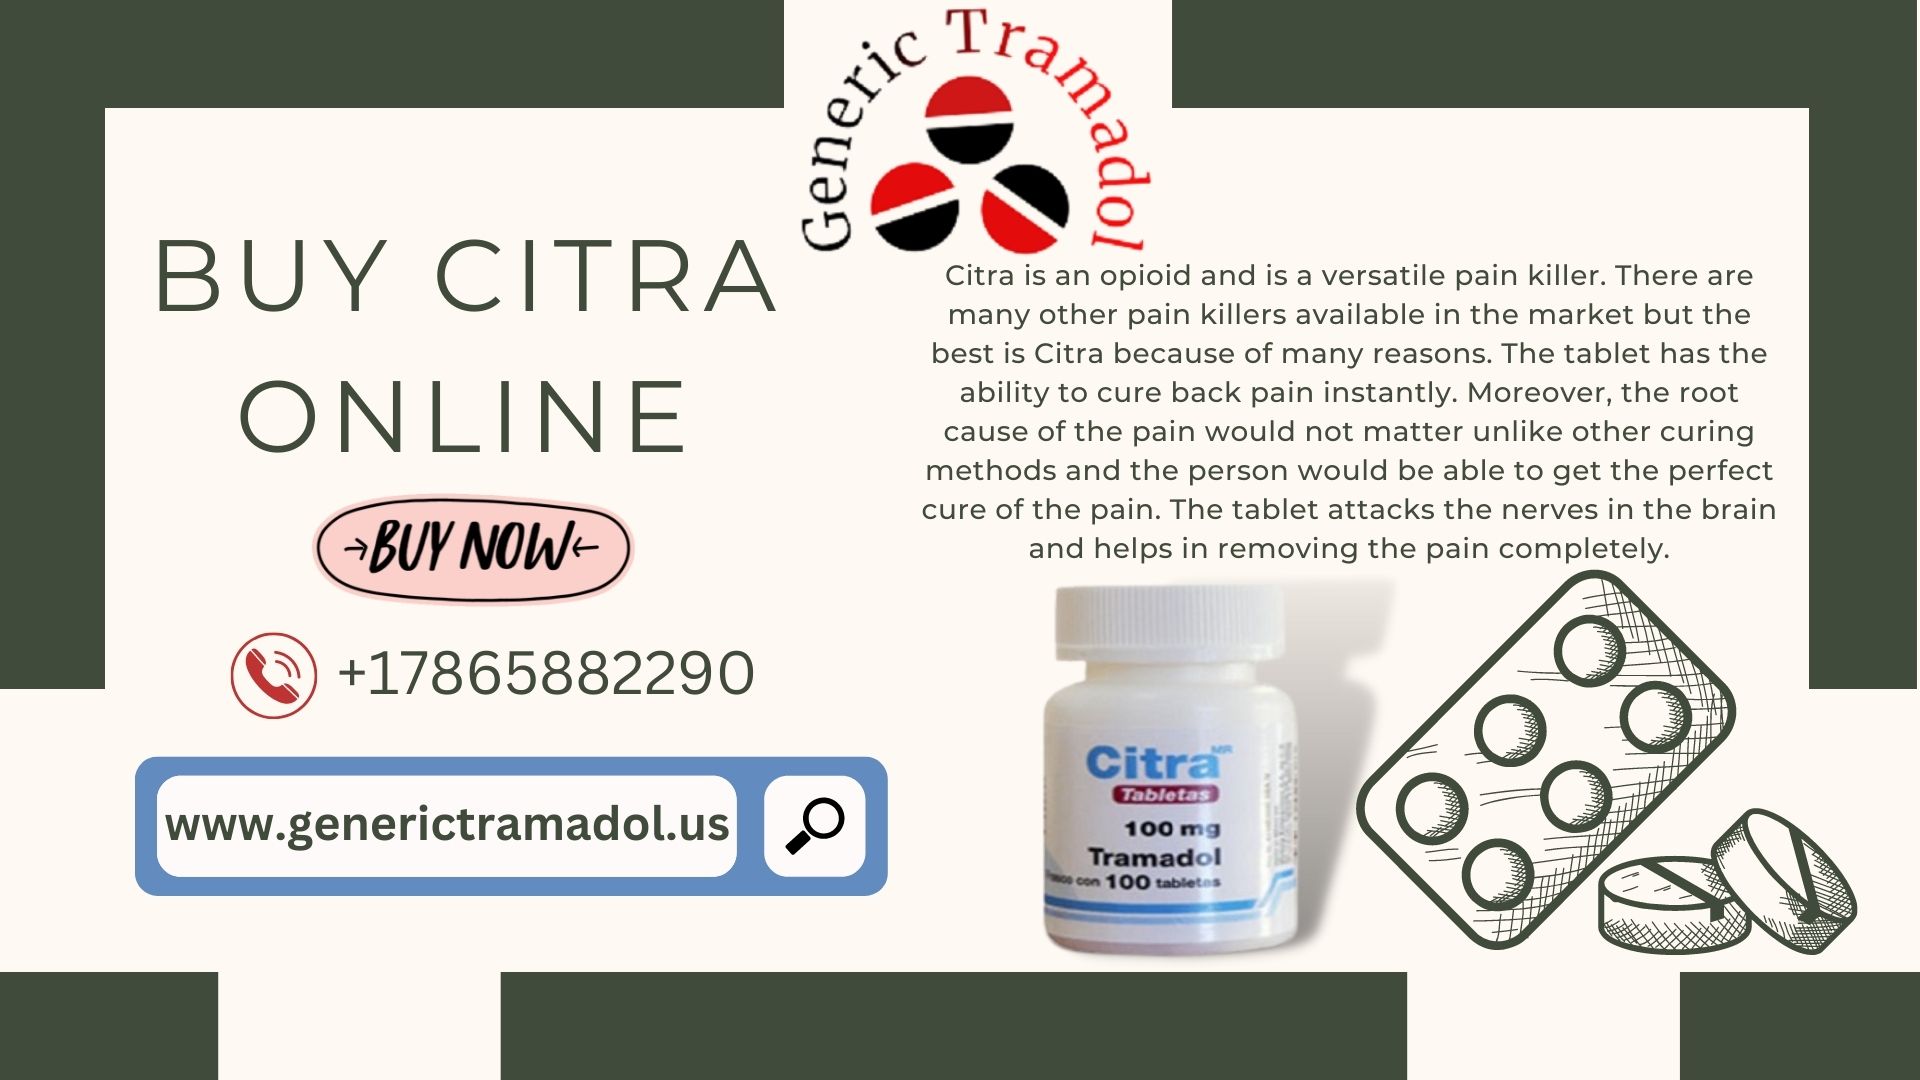 Buy Citra Online Overnight Shipping | Order Tramadol 100mg Online